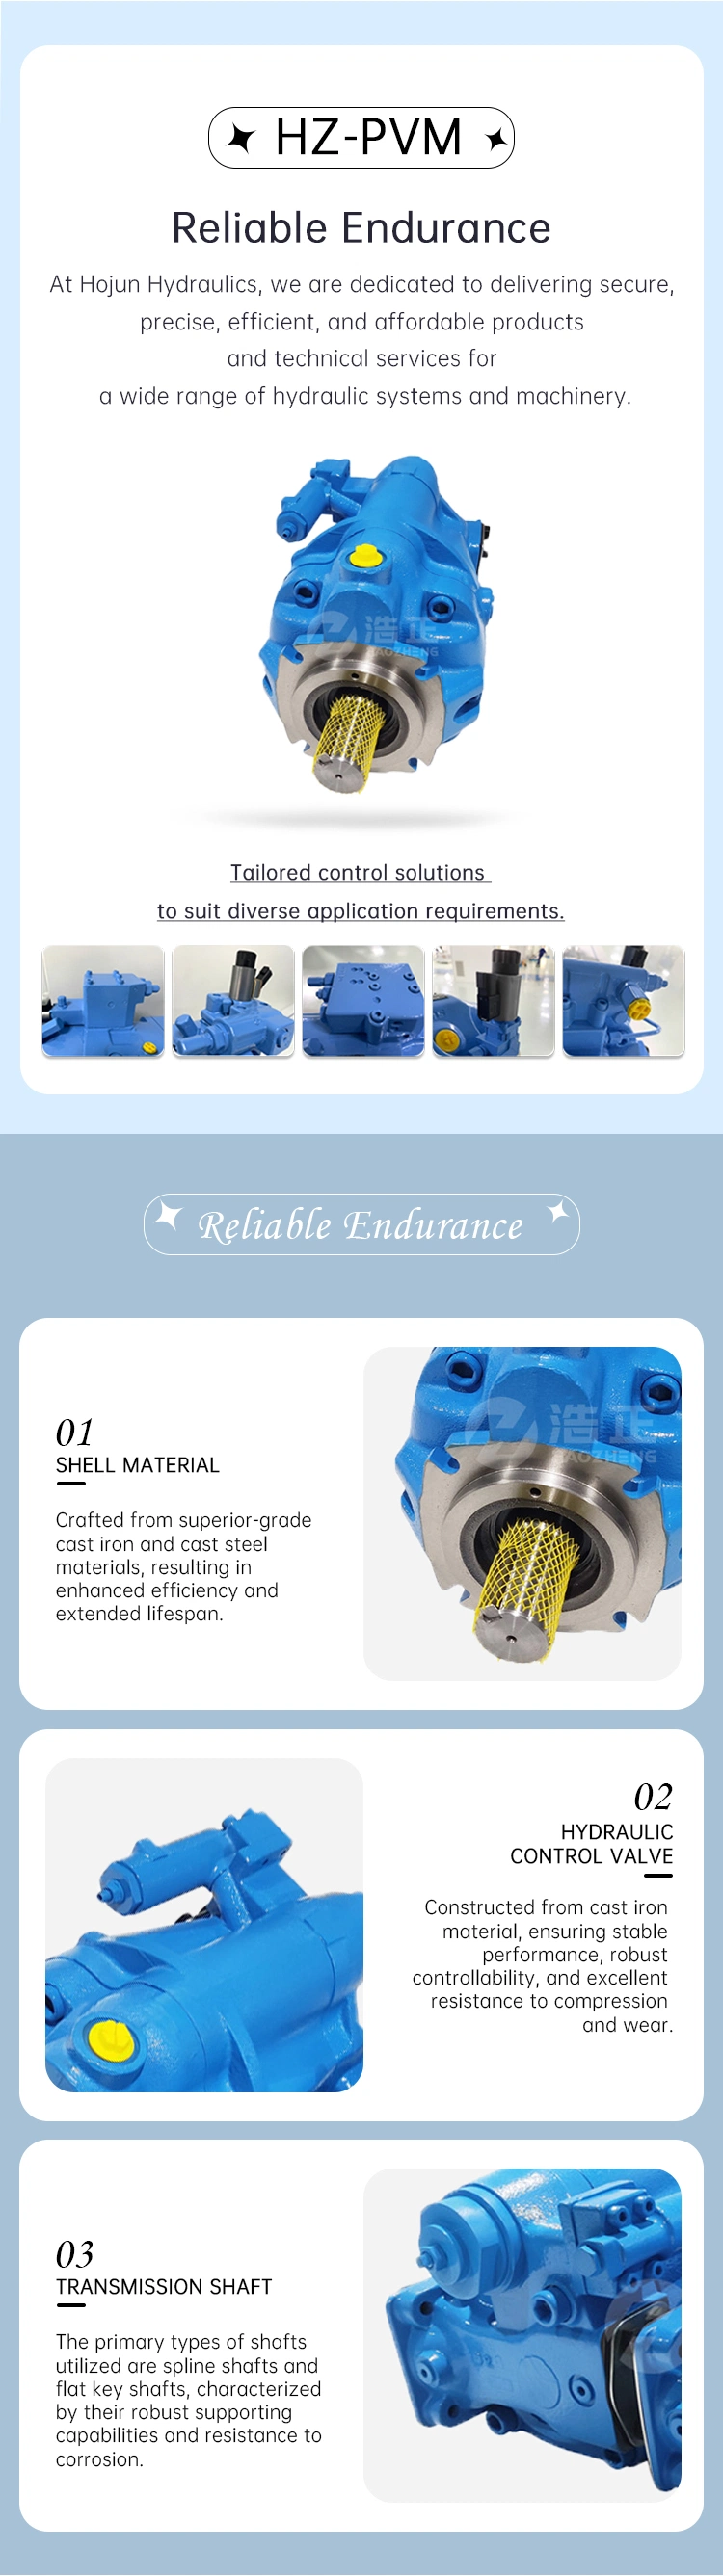 Top Quality Variable Displacement Plunger Design Hydraulic Piston Pumps, Eaton Pvm 131 for Catpump Press Machine Axial Plunger Pump